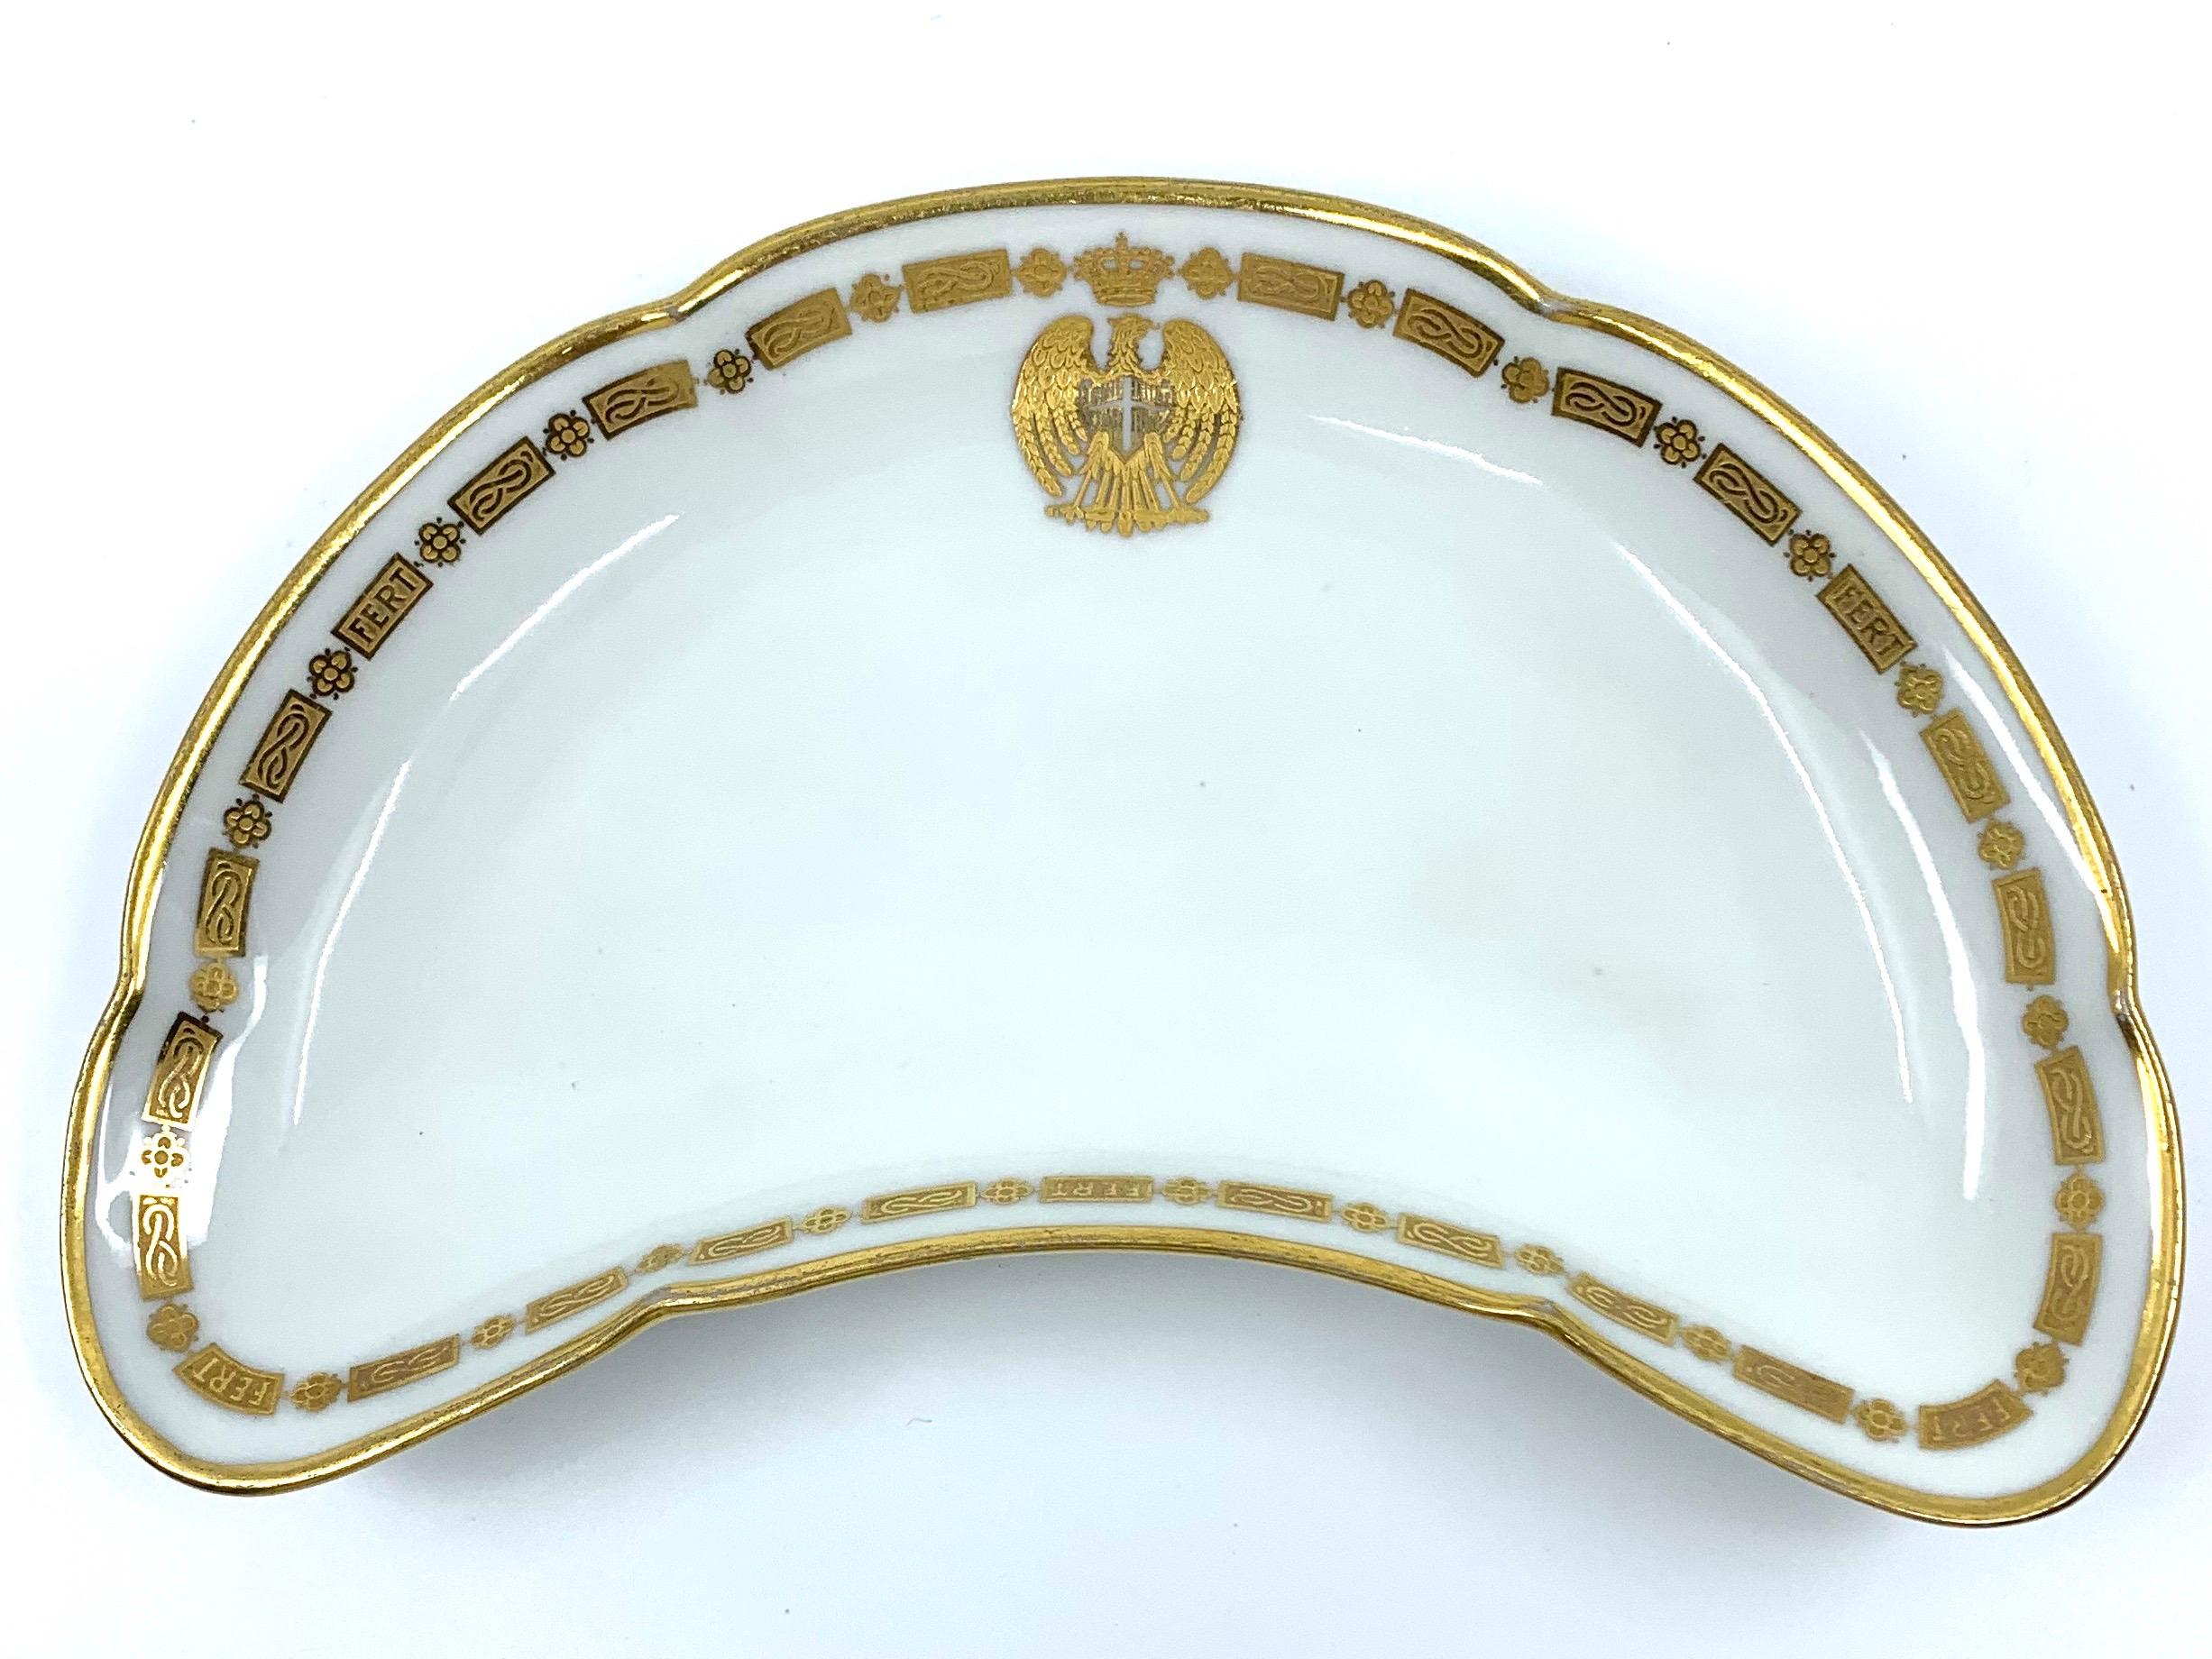 Italian military bone dish vide-poche.  Royal House of Savoy gilt white porcelain shaped and lobed bone dish / vide poche with crowned eagle and border; with markings for Richard-Ginori Pittoria di Doccia and stamped for the Foreign Ministry, Rome. 